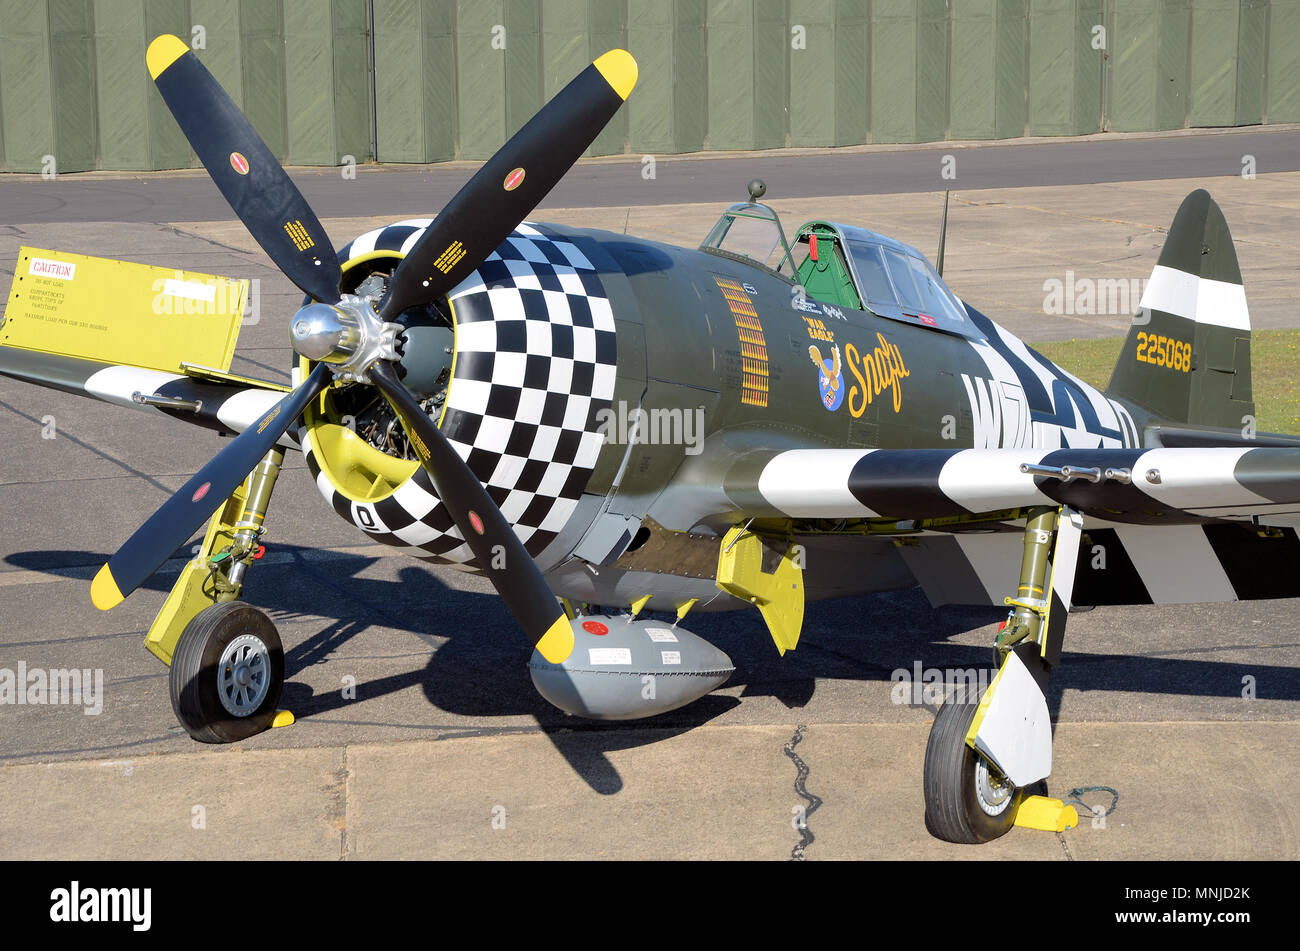 Republic P-47 Thunderbolt named Snafu, War Eagle. World War Two, Second World War fighter plane rolled out after painting. Checkerboard nose Stock Photo